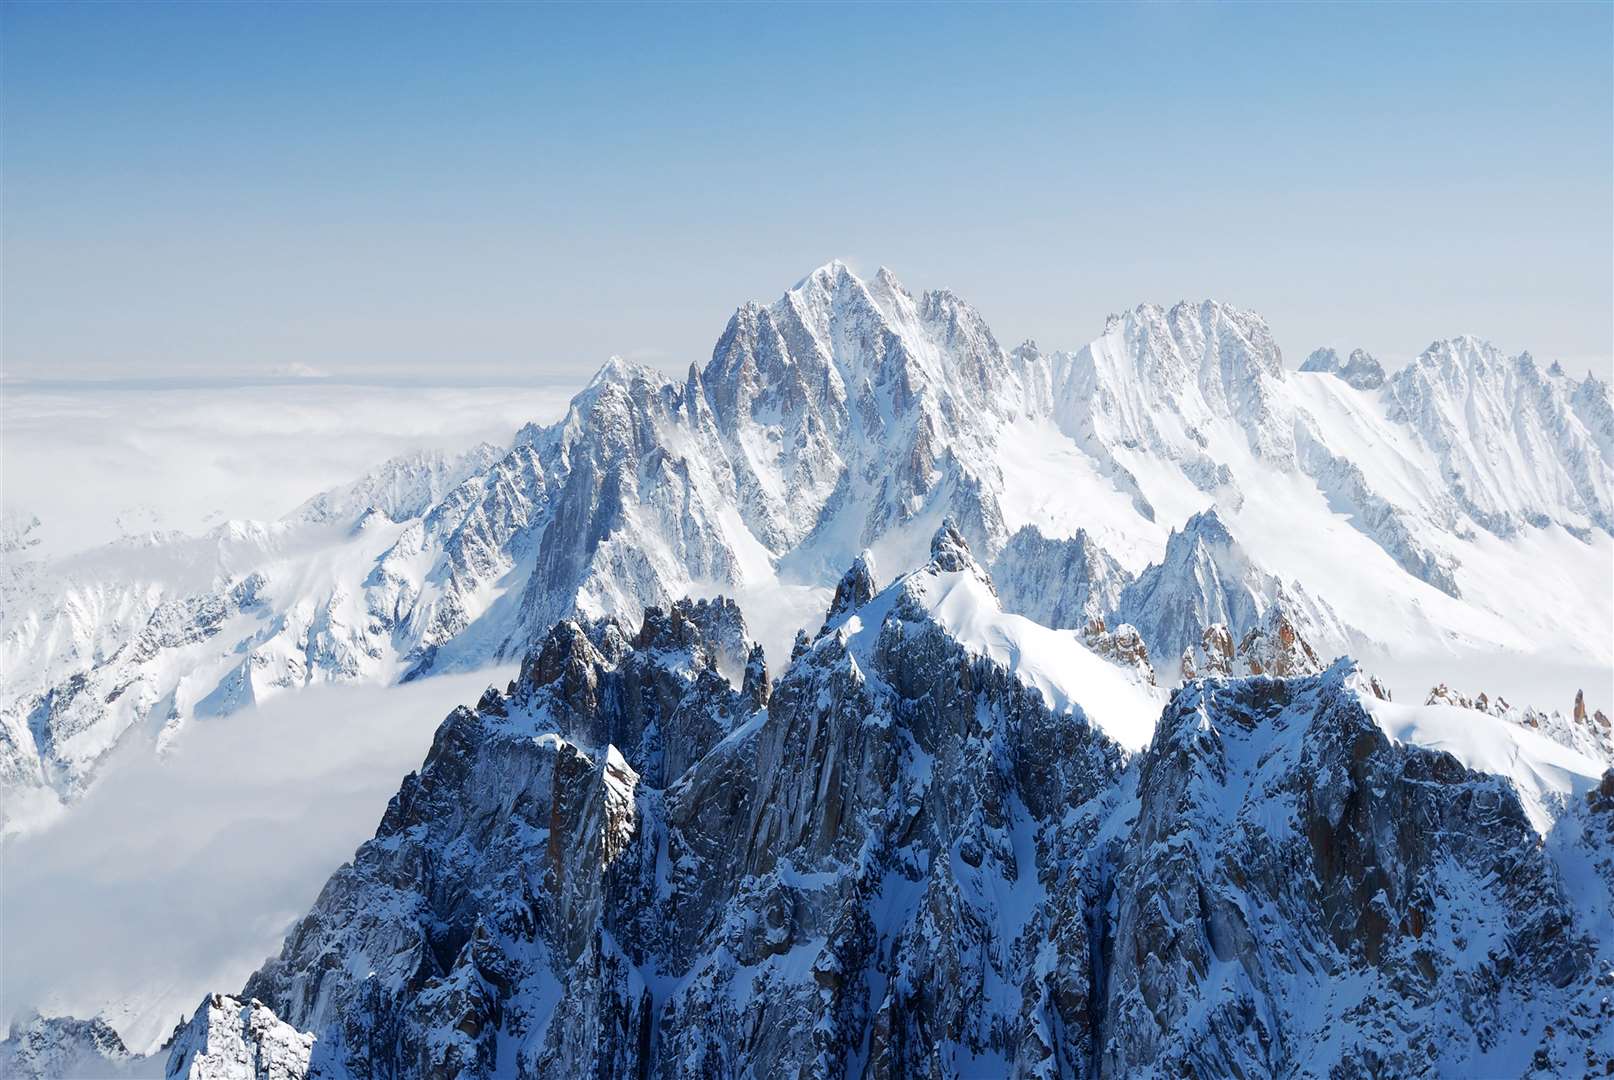 The discovery was made in the French Alps (Alamy/PA)